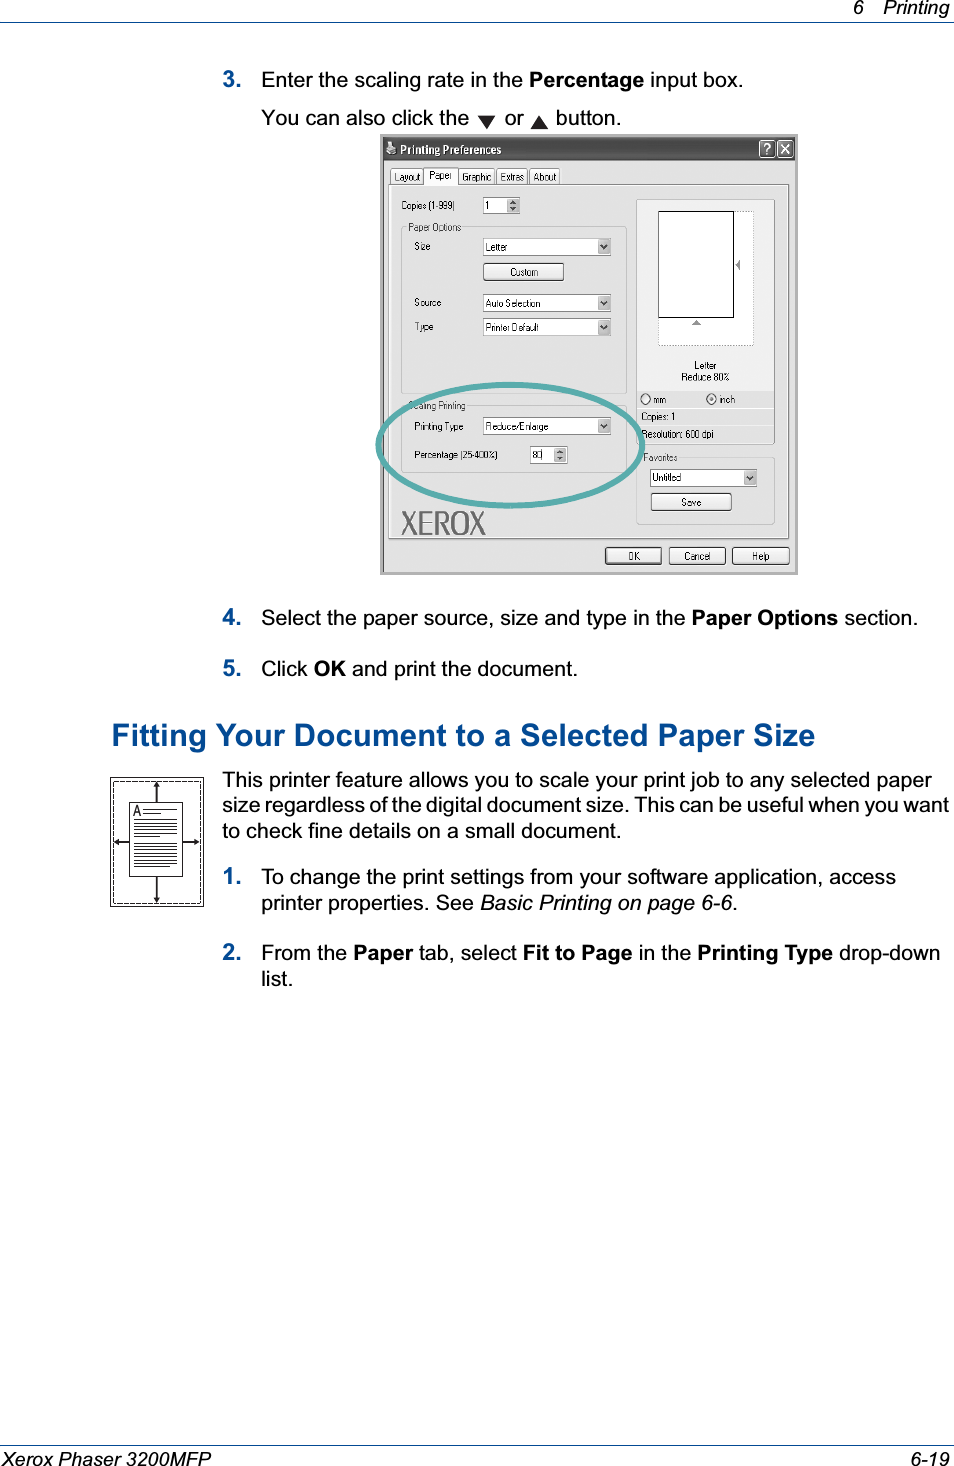 6Printing Xerox Phaser 3200MFP 6-193. Enter the scaling rate in the Percentage input box.You can also click the   or   button.4. Select the paper source, size and type in the Paper Options section.5. Click OK and print the document. Fitting Your Document to a Selected Paper SizeThis printer feature allows you to scale your print job to any selected paper size regardless of the digital document size. This can be useful when you want to check fine details on a small document. 1. To change the print settings from your software application, access printer properties. See Basic Printing on page 6-6.2. From the Paper tab, select Fit to Page in the Printing Type drop-down list. A